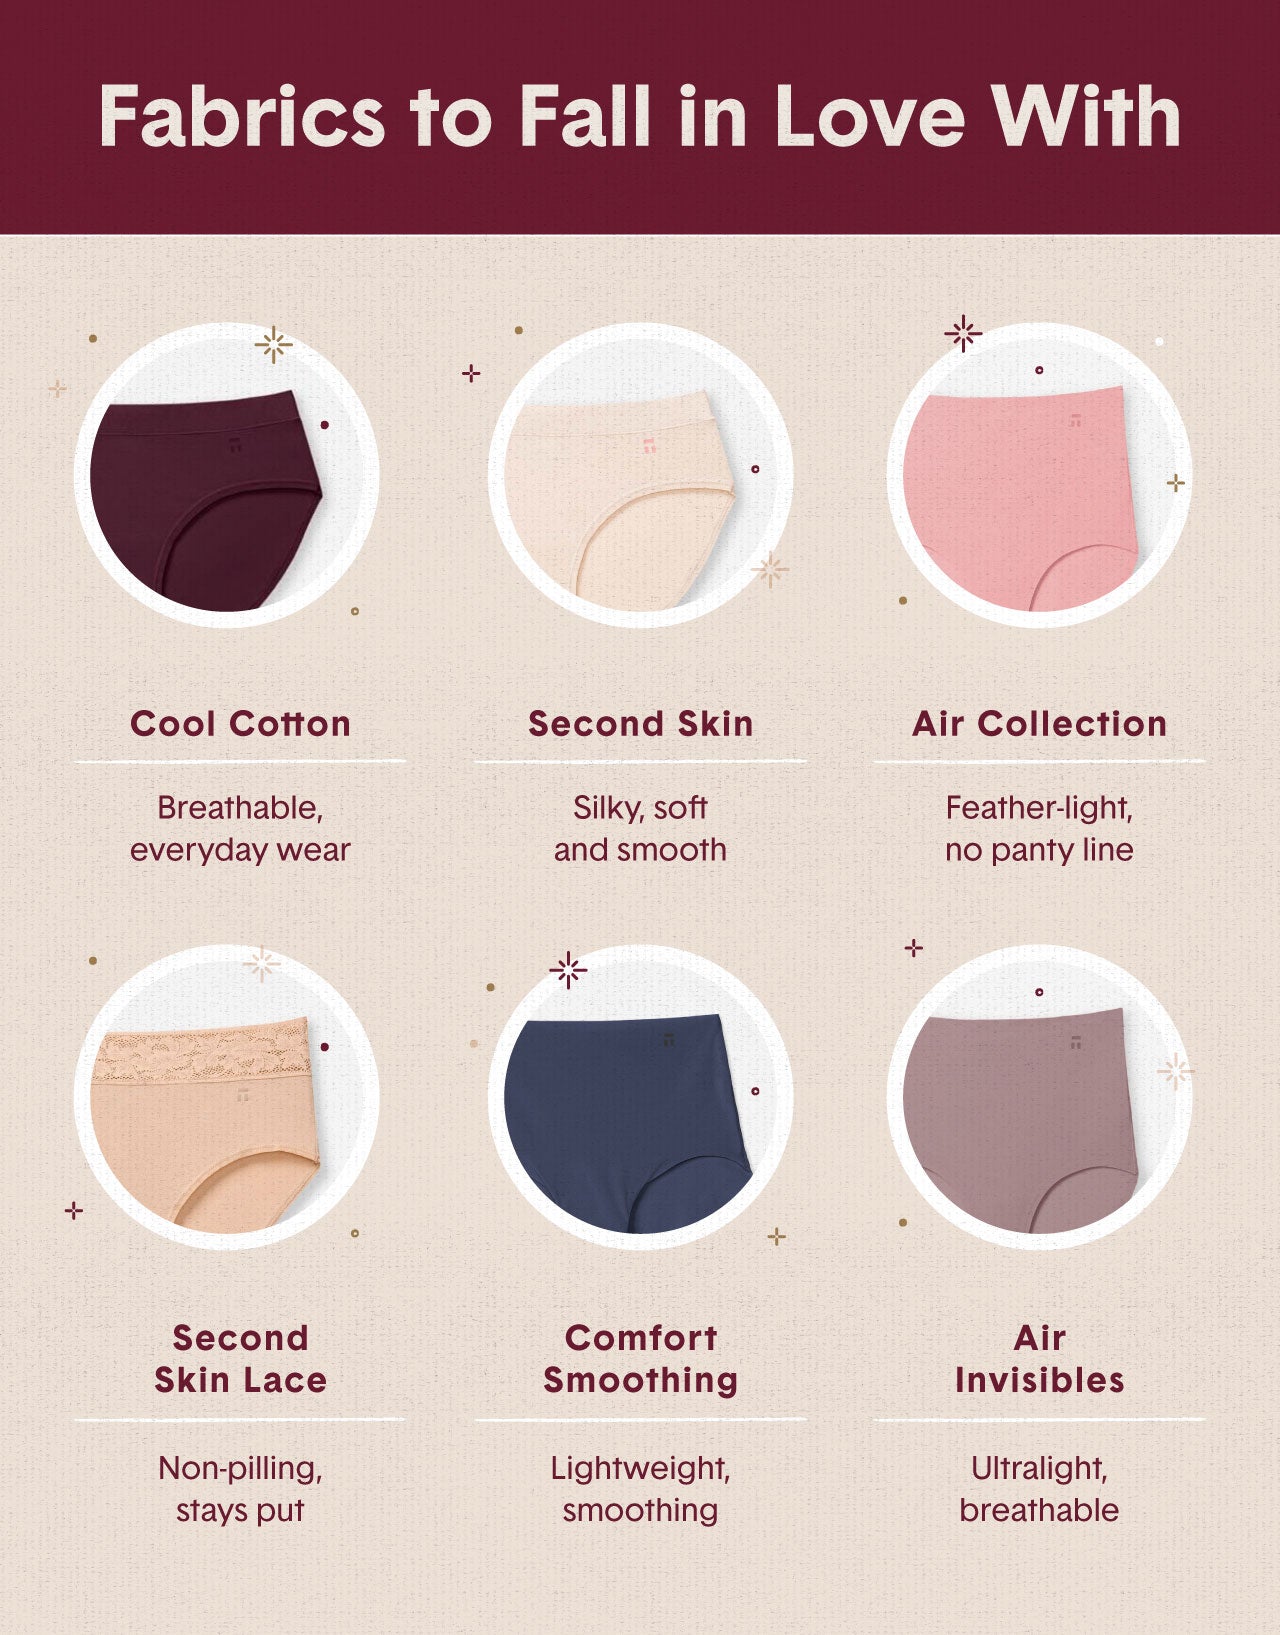 Your Perfect Jeans | Find the Jeans for Your Body Shape | Stitch Fix Style